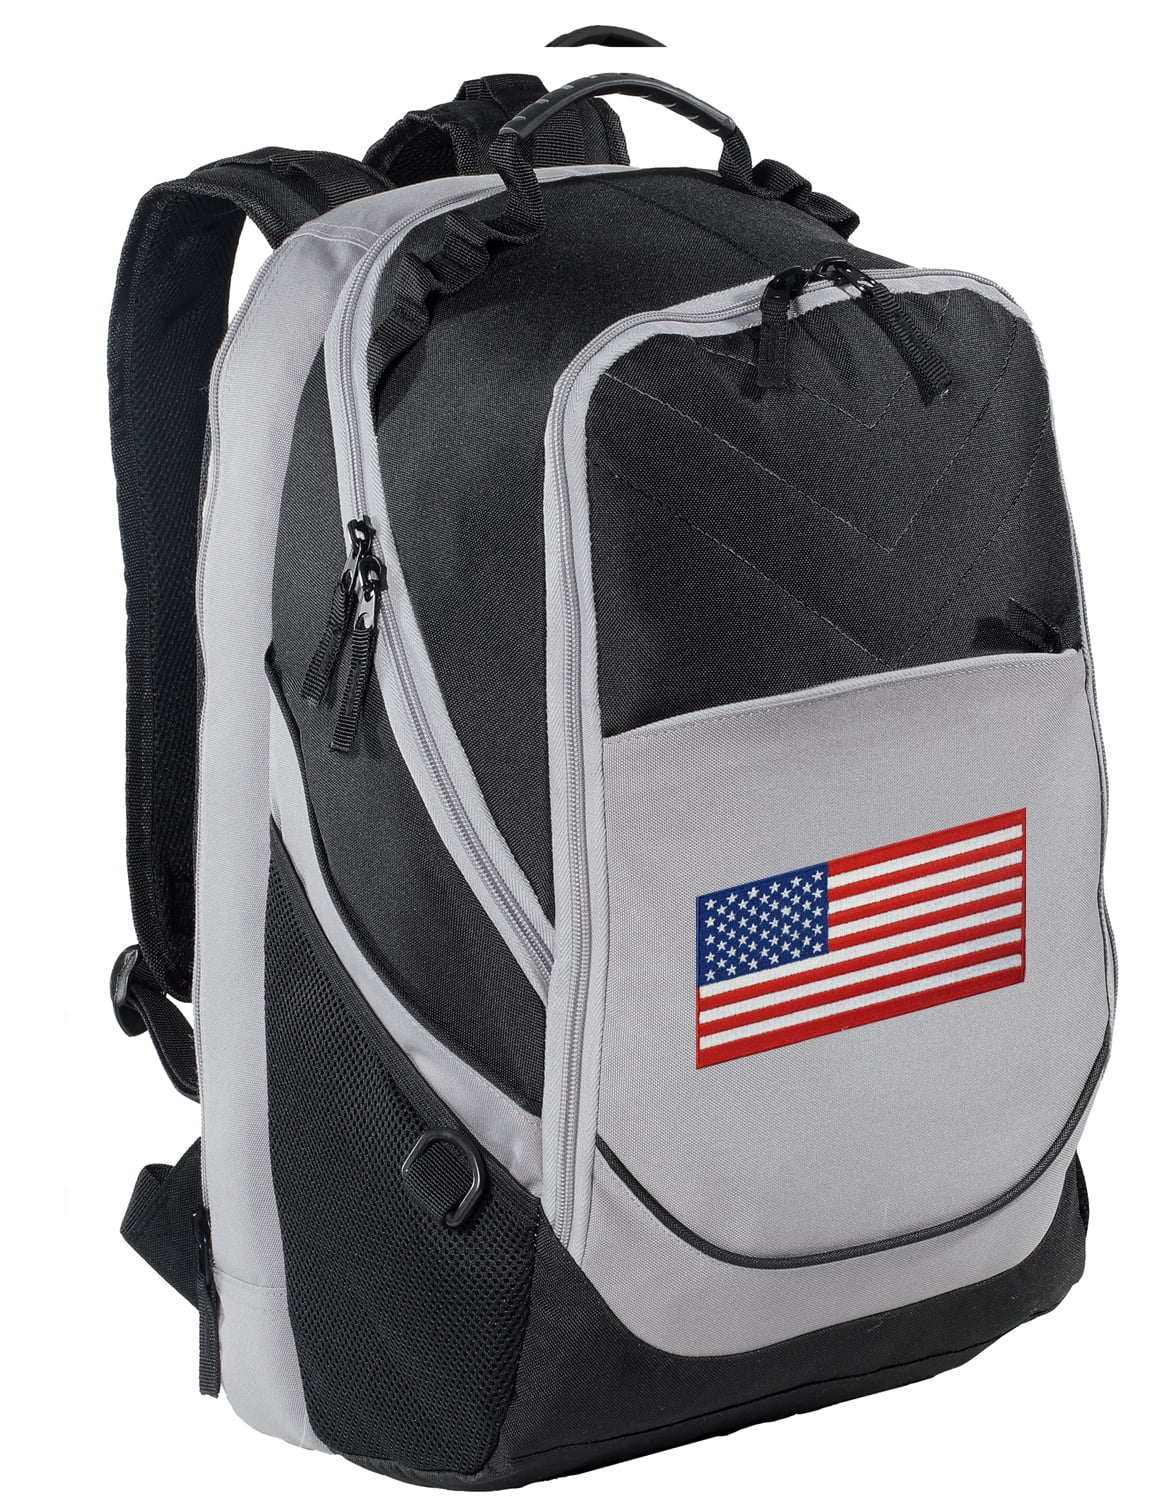 ALAZA American Eagle With USA Flag Stripe Large Backpack Personalized Laptop iPad Tablet Travel School Bag with Multiple Pockets